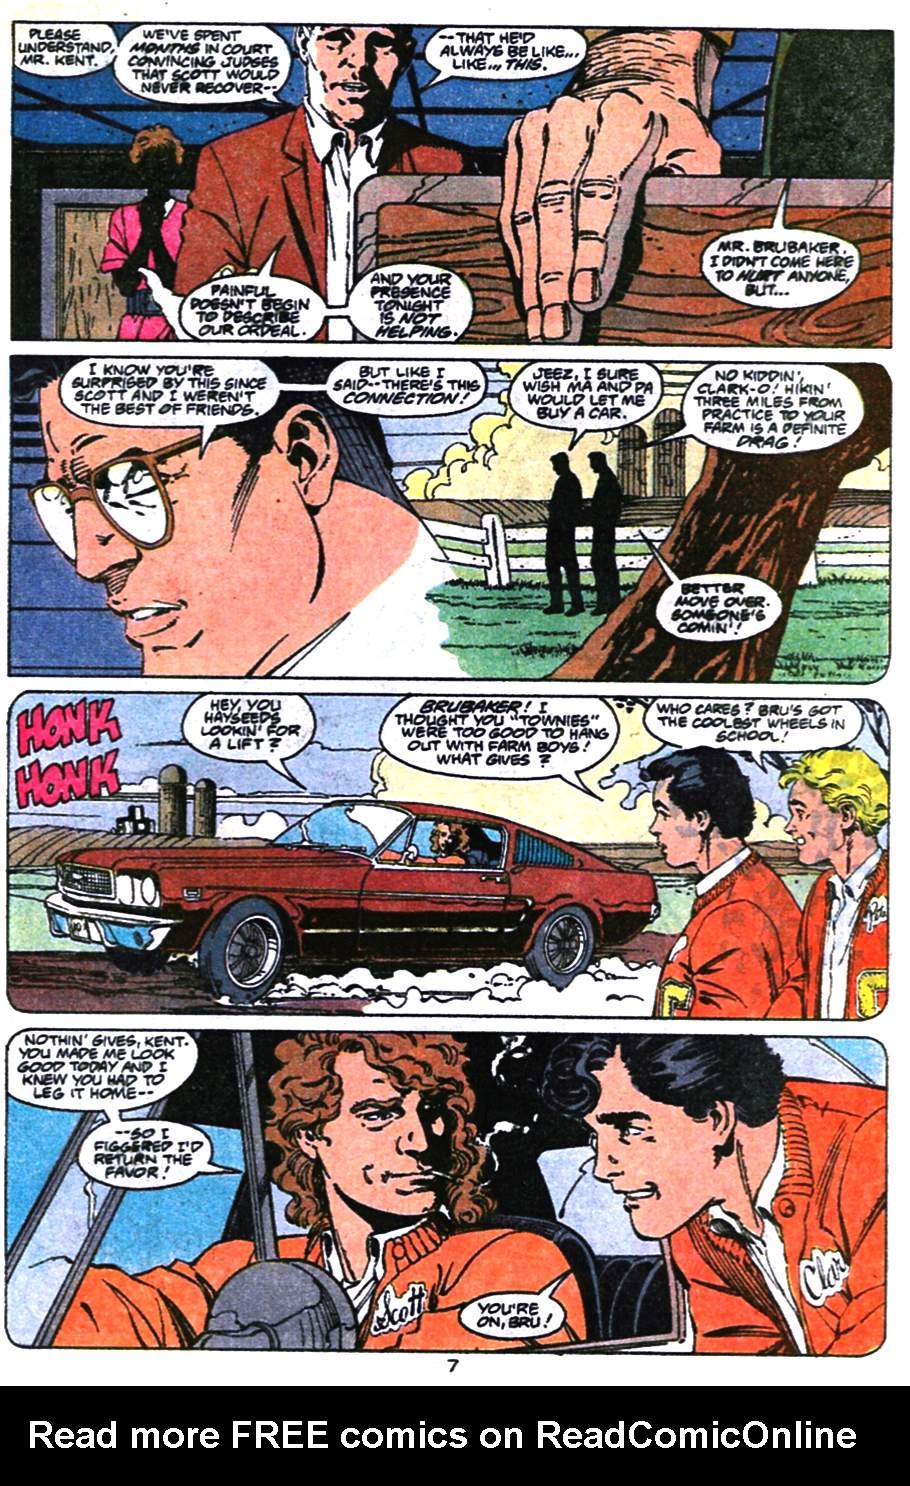 Adventures of Superman (1987) 474 Page 7